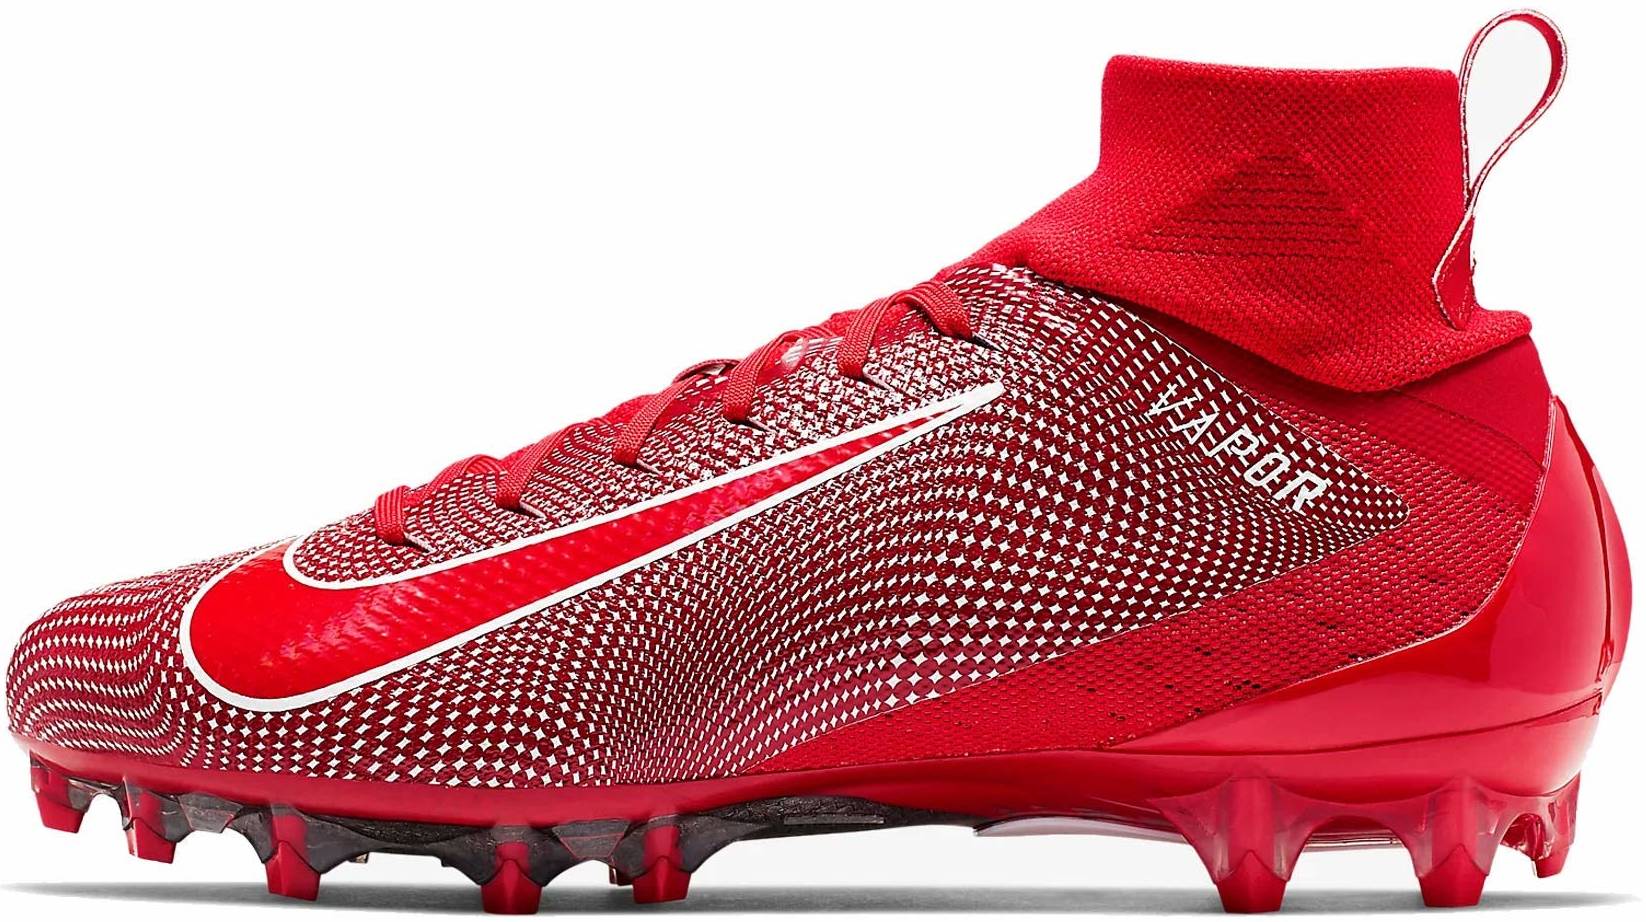 Save 12% on Red Nike Football Cleats (7 